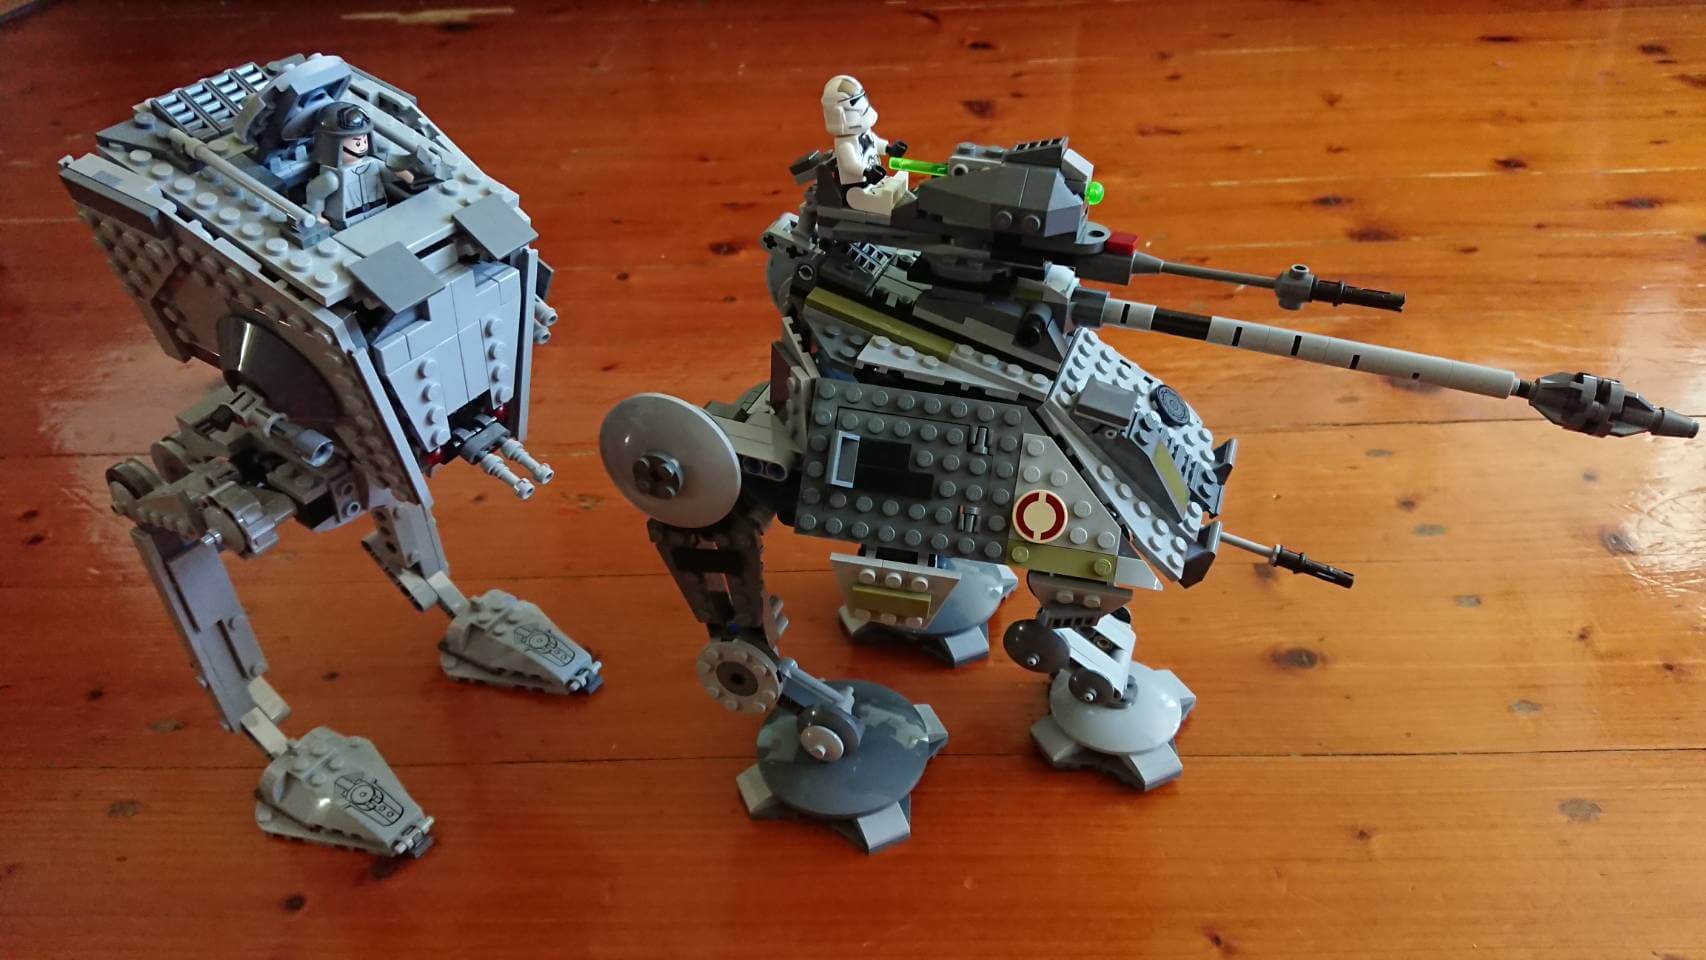 The AT-ST Walker has 2 legs and the AT-AP Walker has 3 legs and longer guns